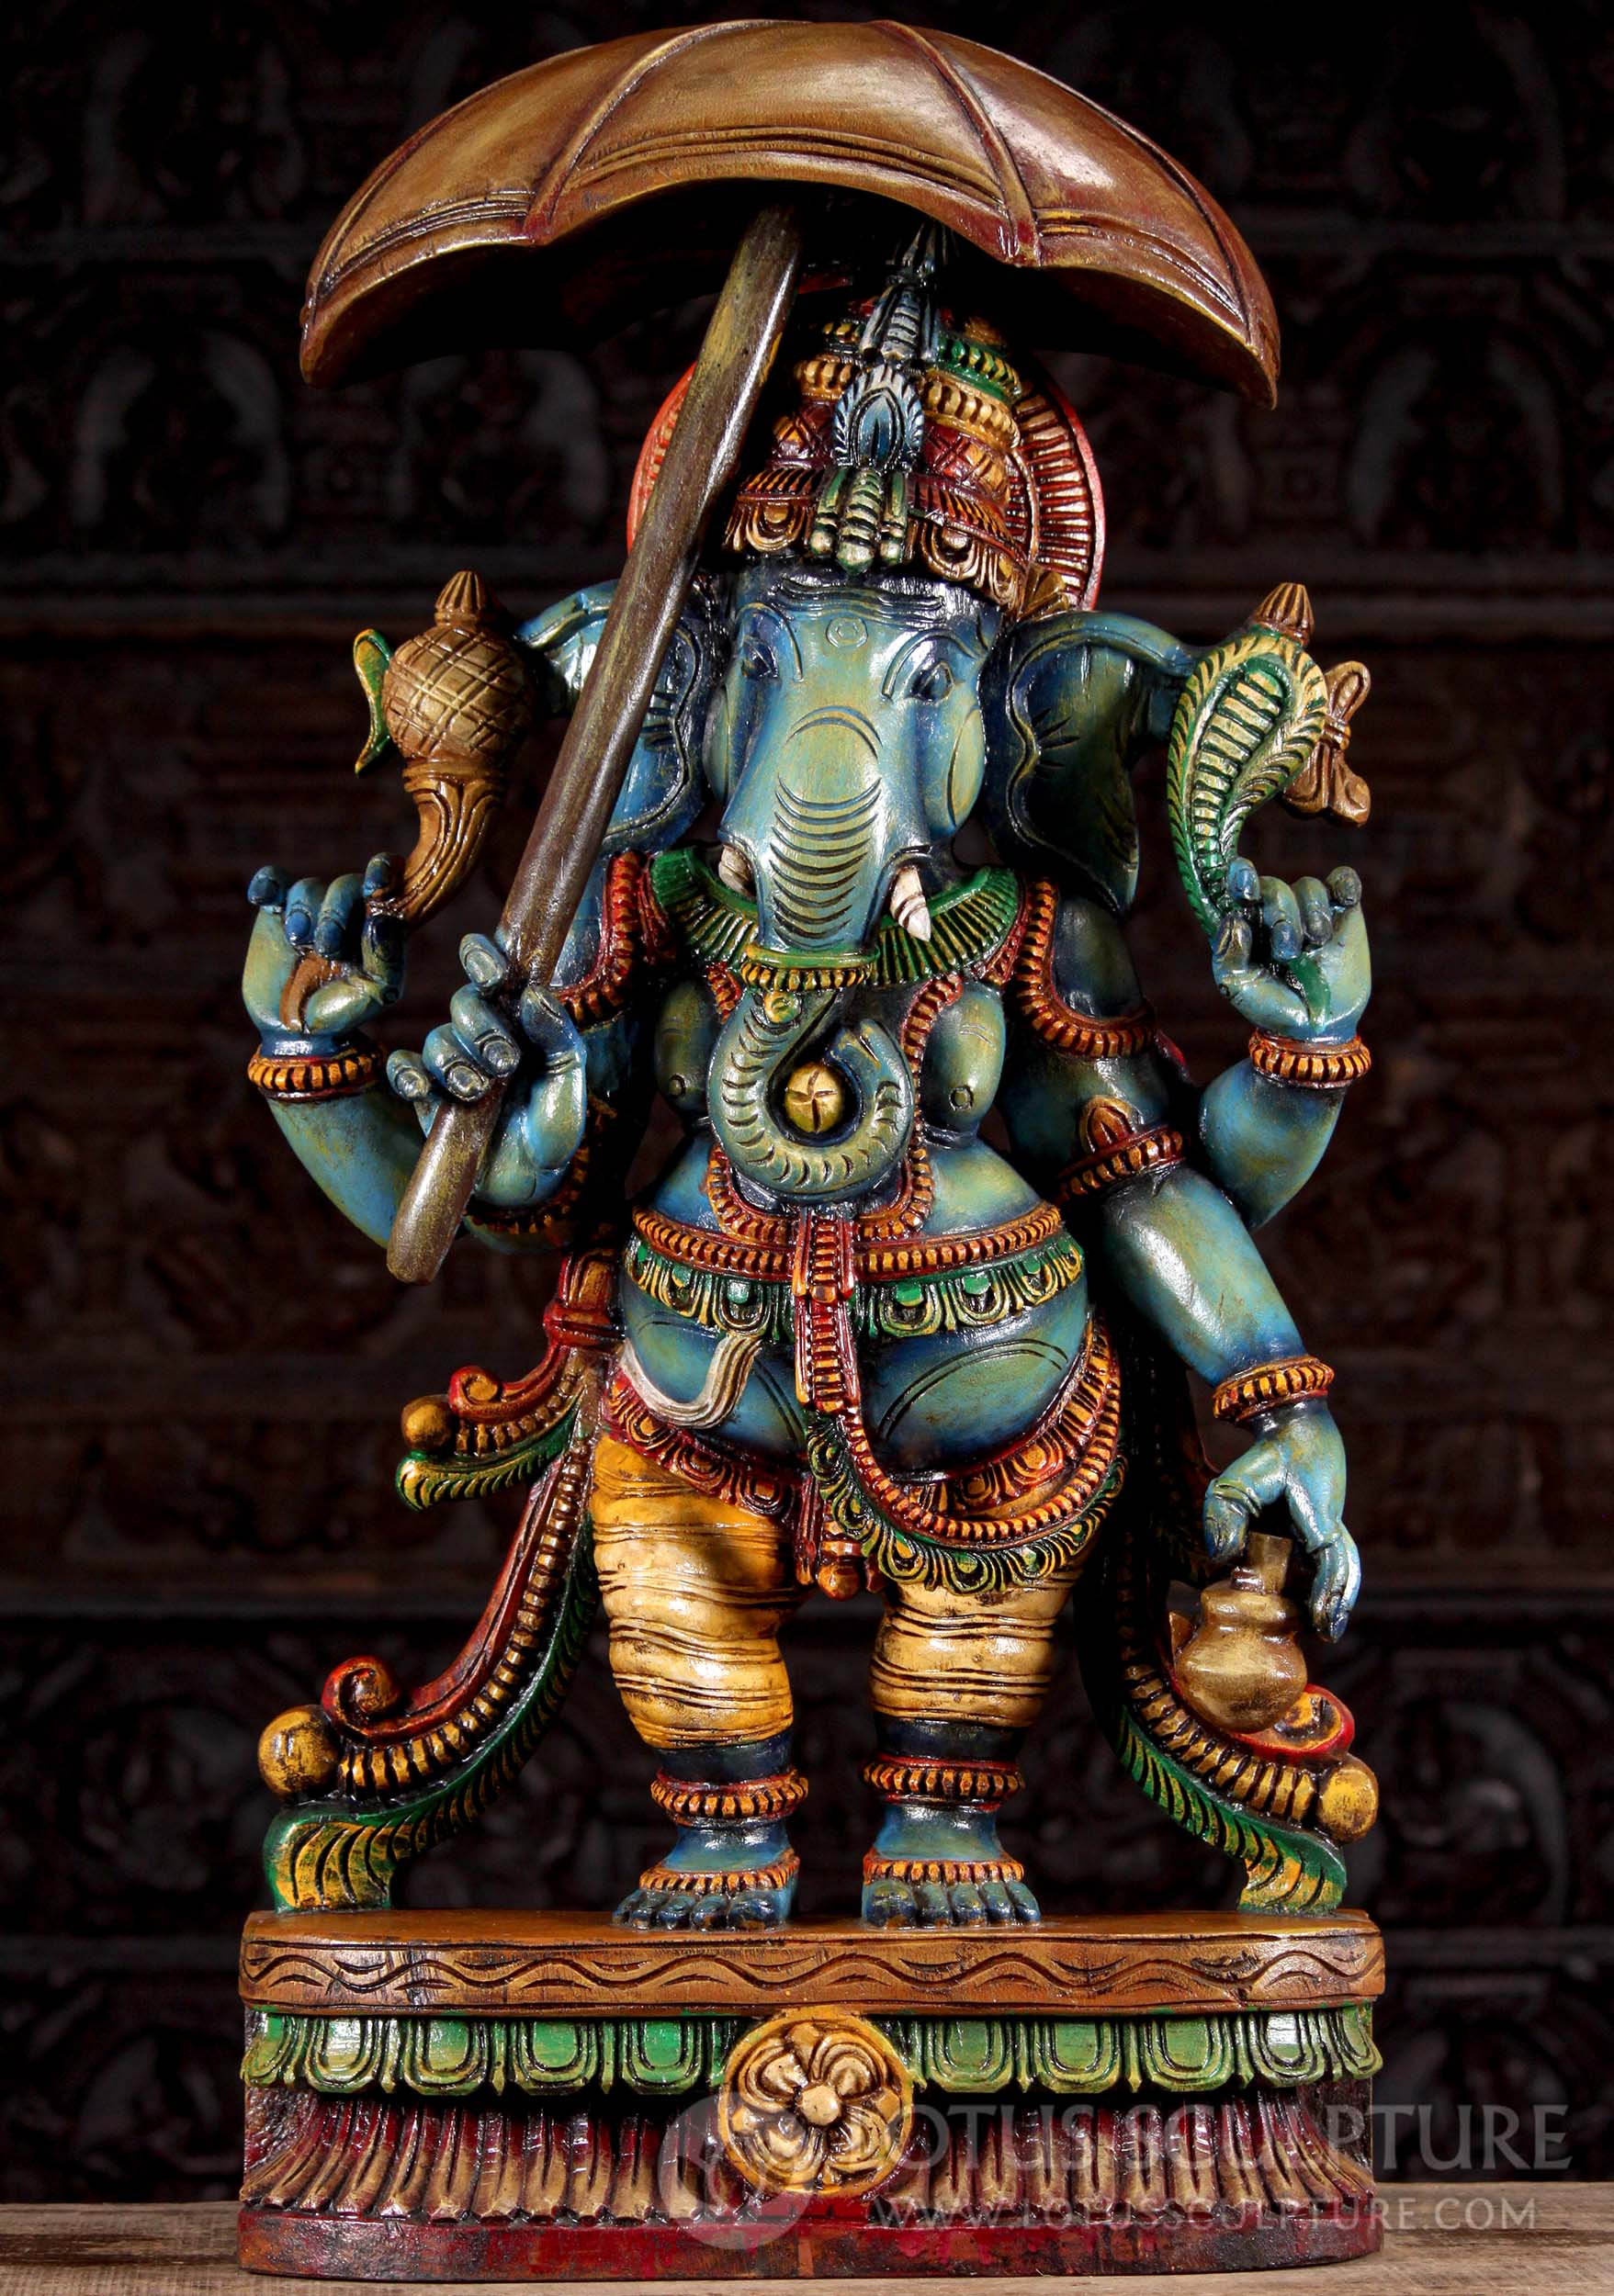 Hand painted Ganesh from India